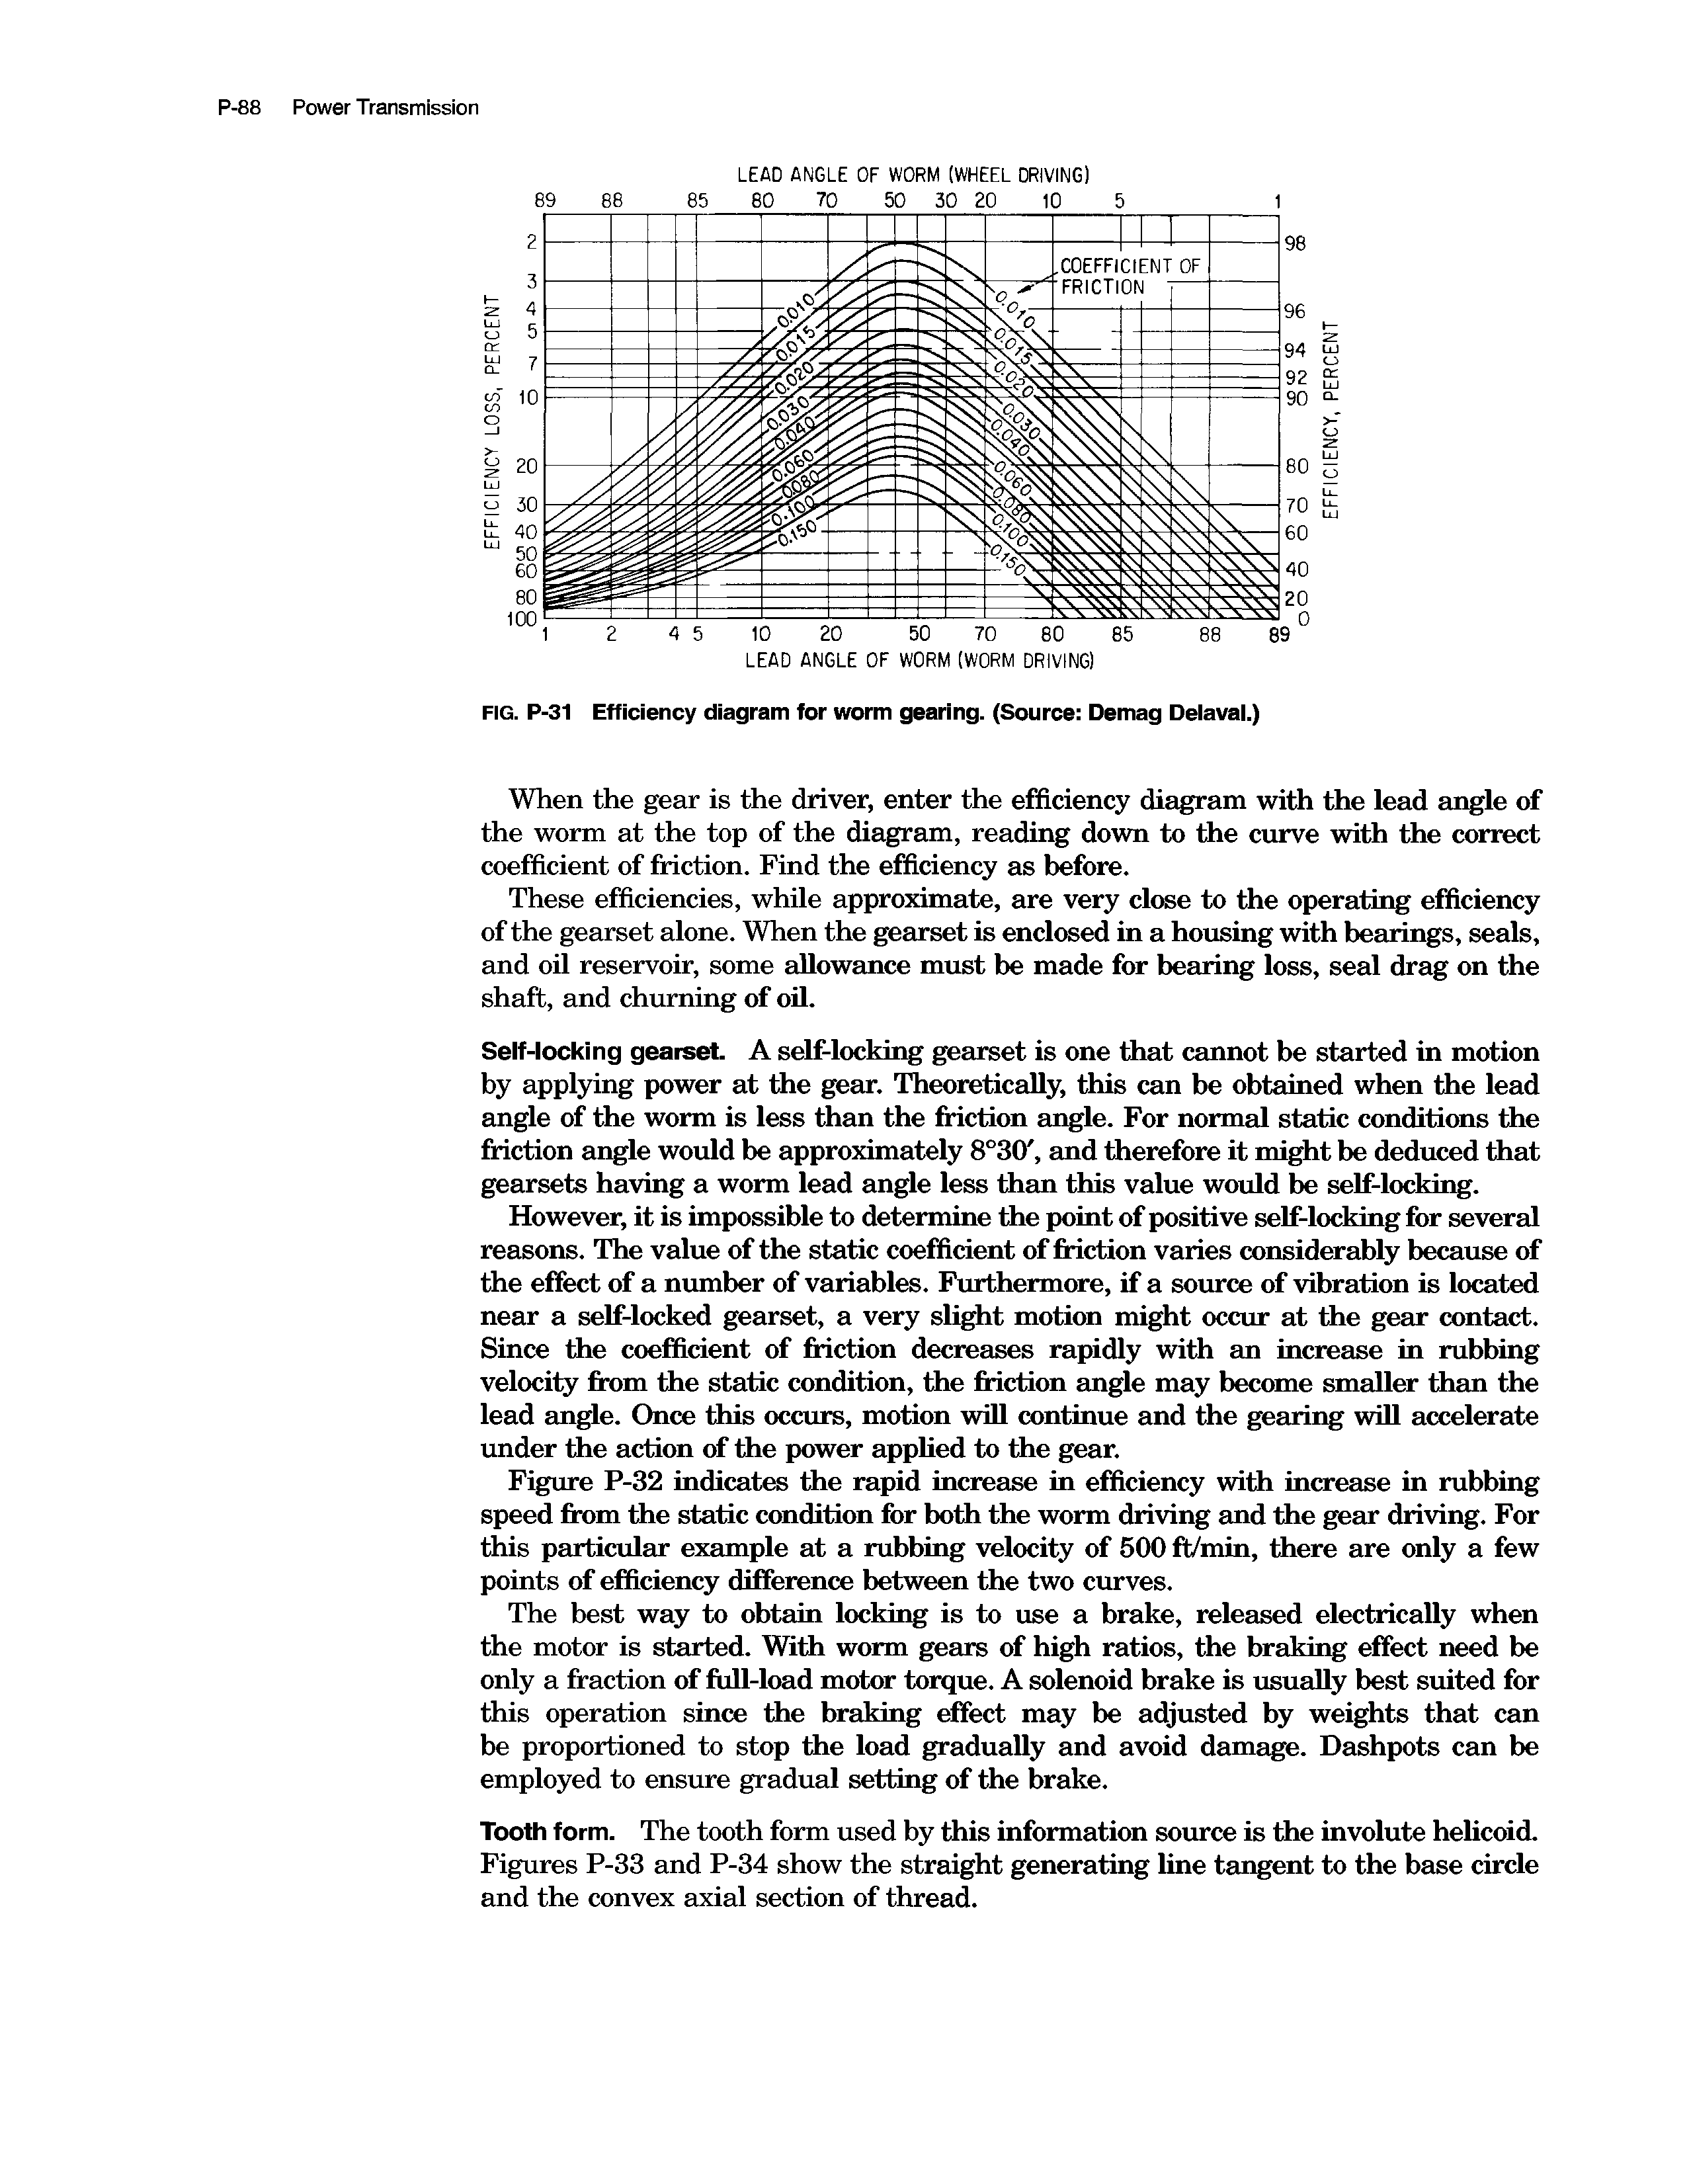 Figure P-32 indicates the rapid increase in efficiency with increase in rubbing speed from the static condition for both the worm driving and the gear driving. For this particular example at a rubbing velocity of 500 ft/min, there are only a few points of efficiency difference between the two curves.